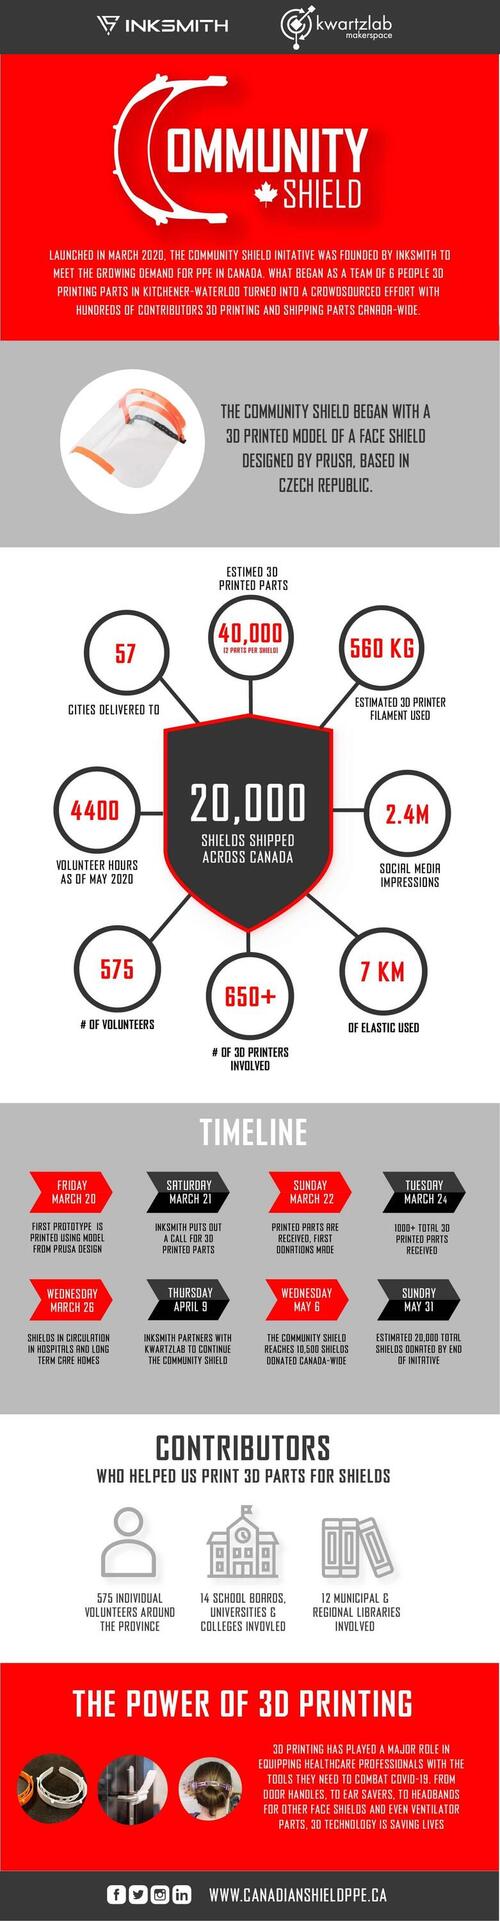 an infographic provided by Inksmith to explain the Community Shield